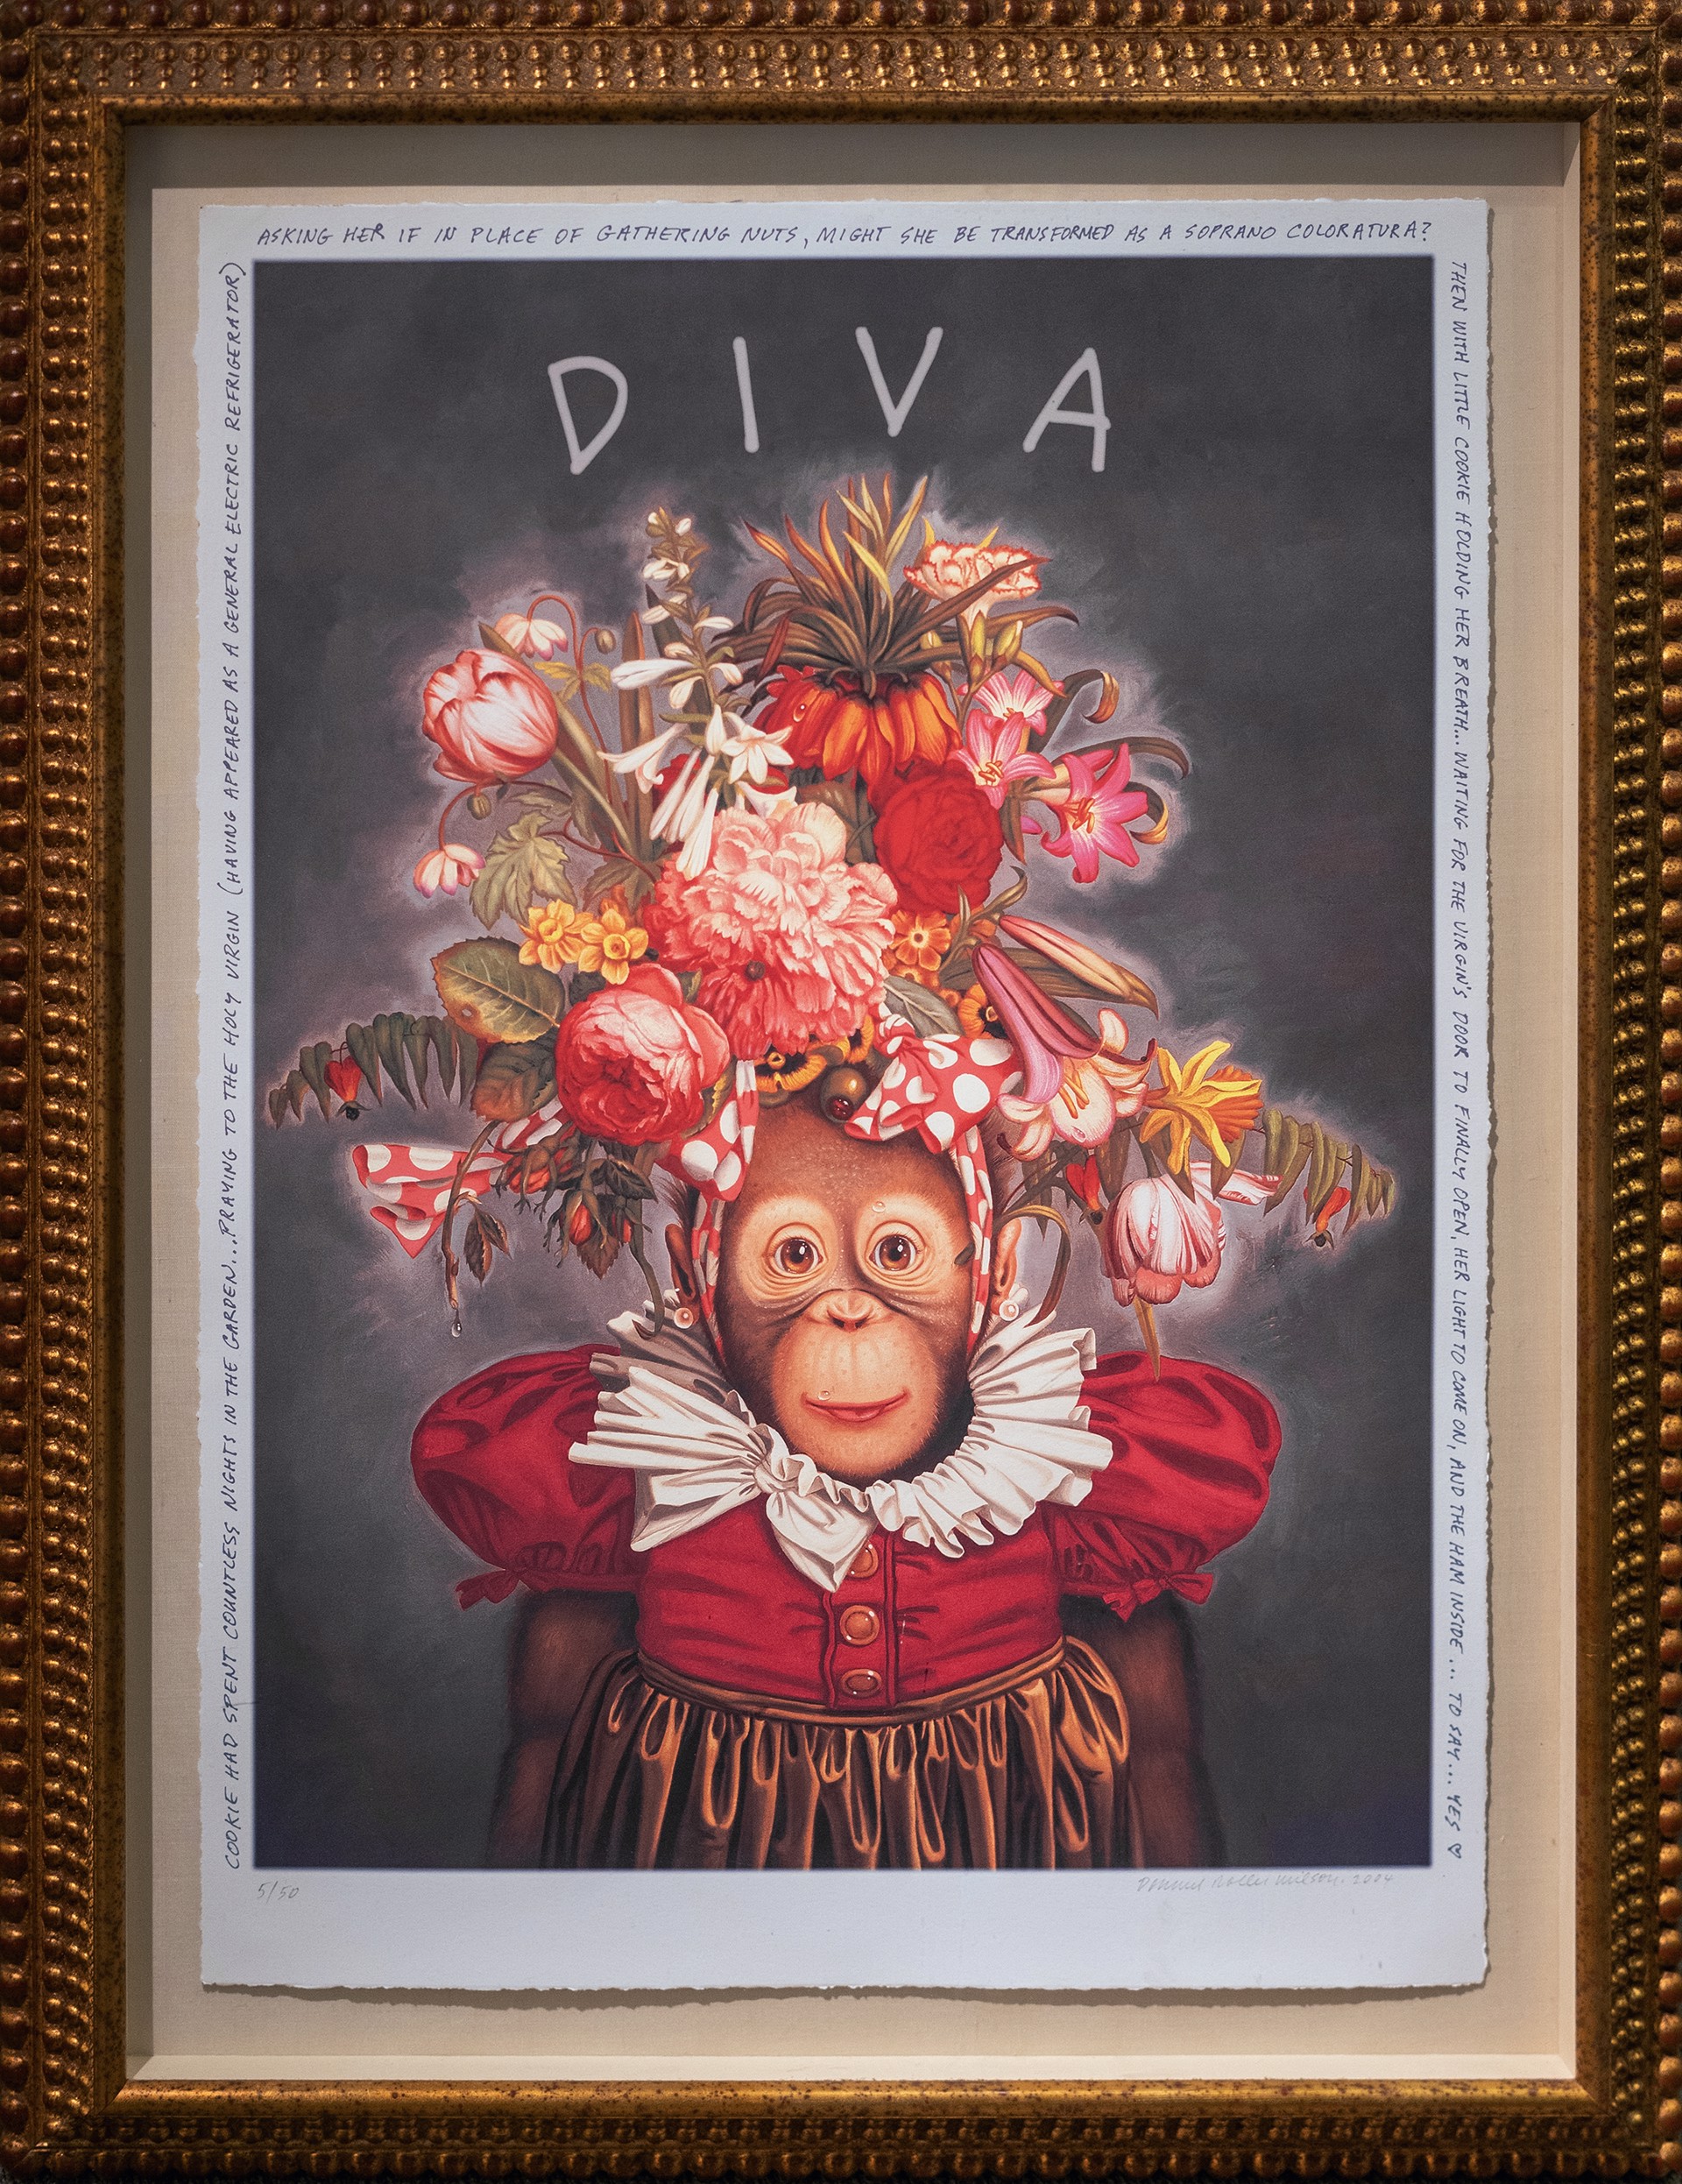 Cookie As Diva, EDITION 5/50 by Donald Roller Wilson